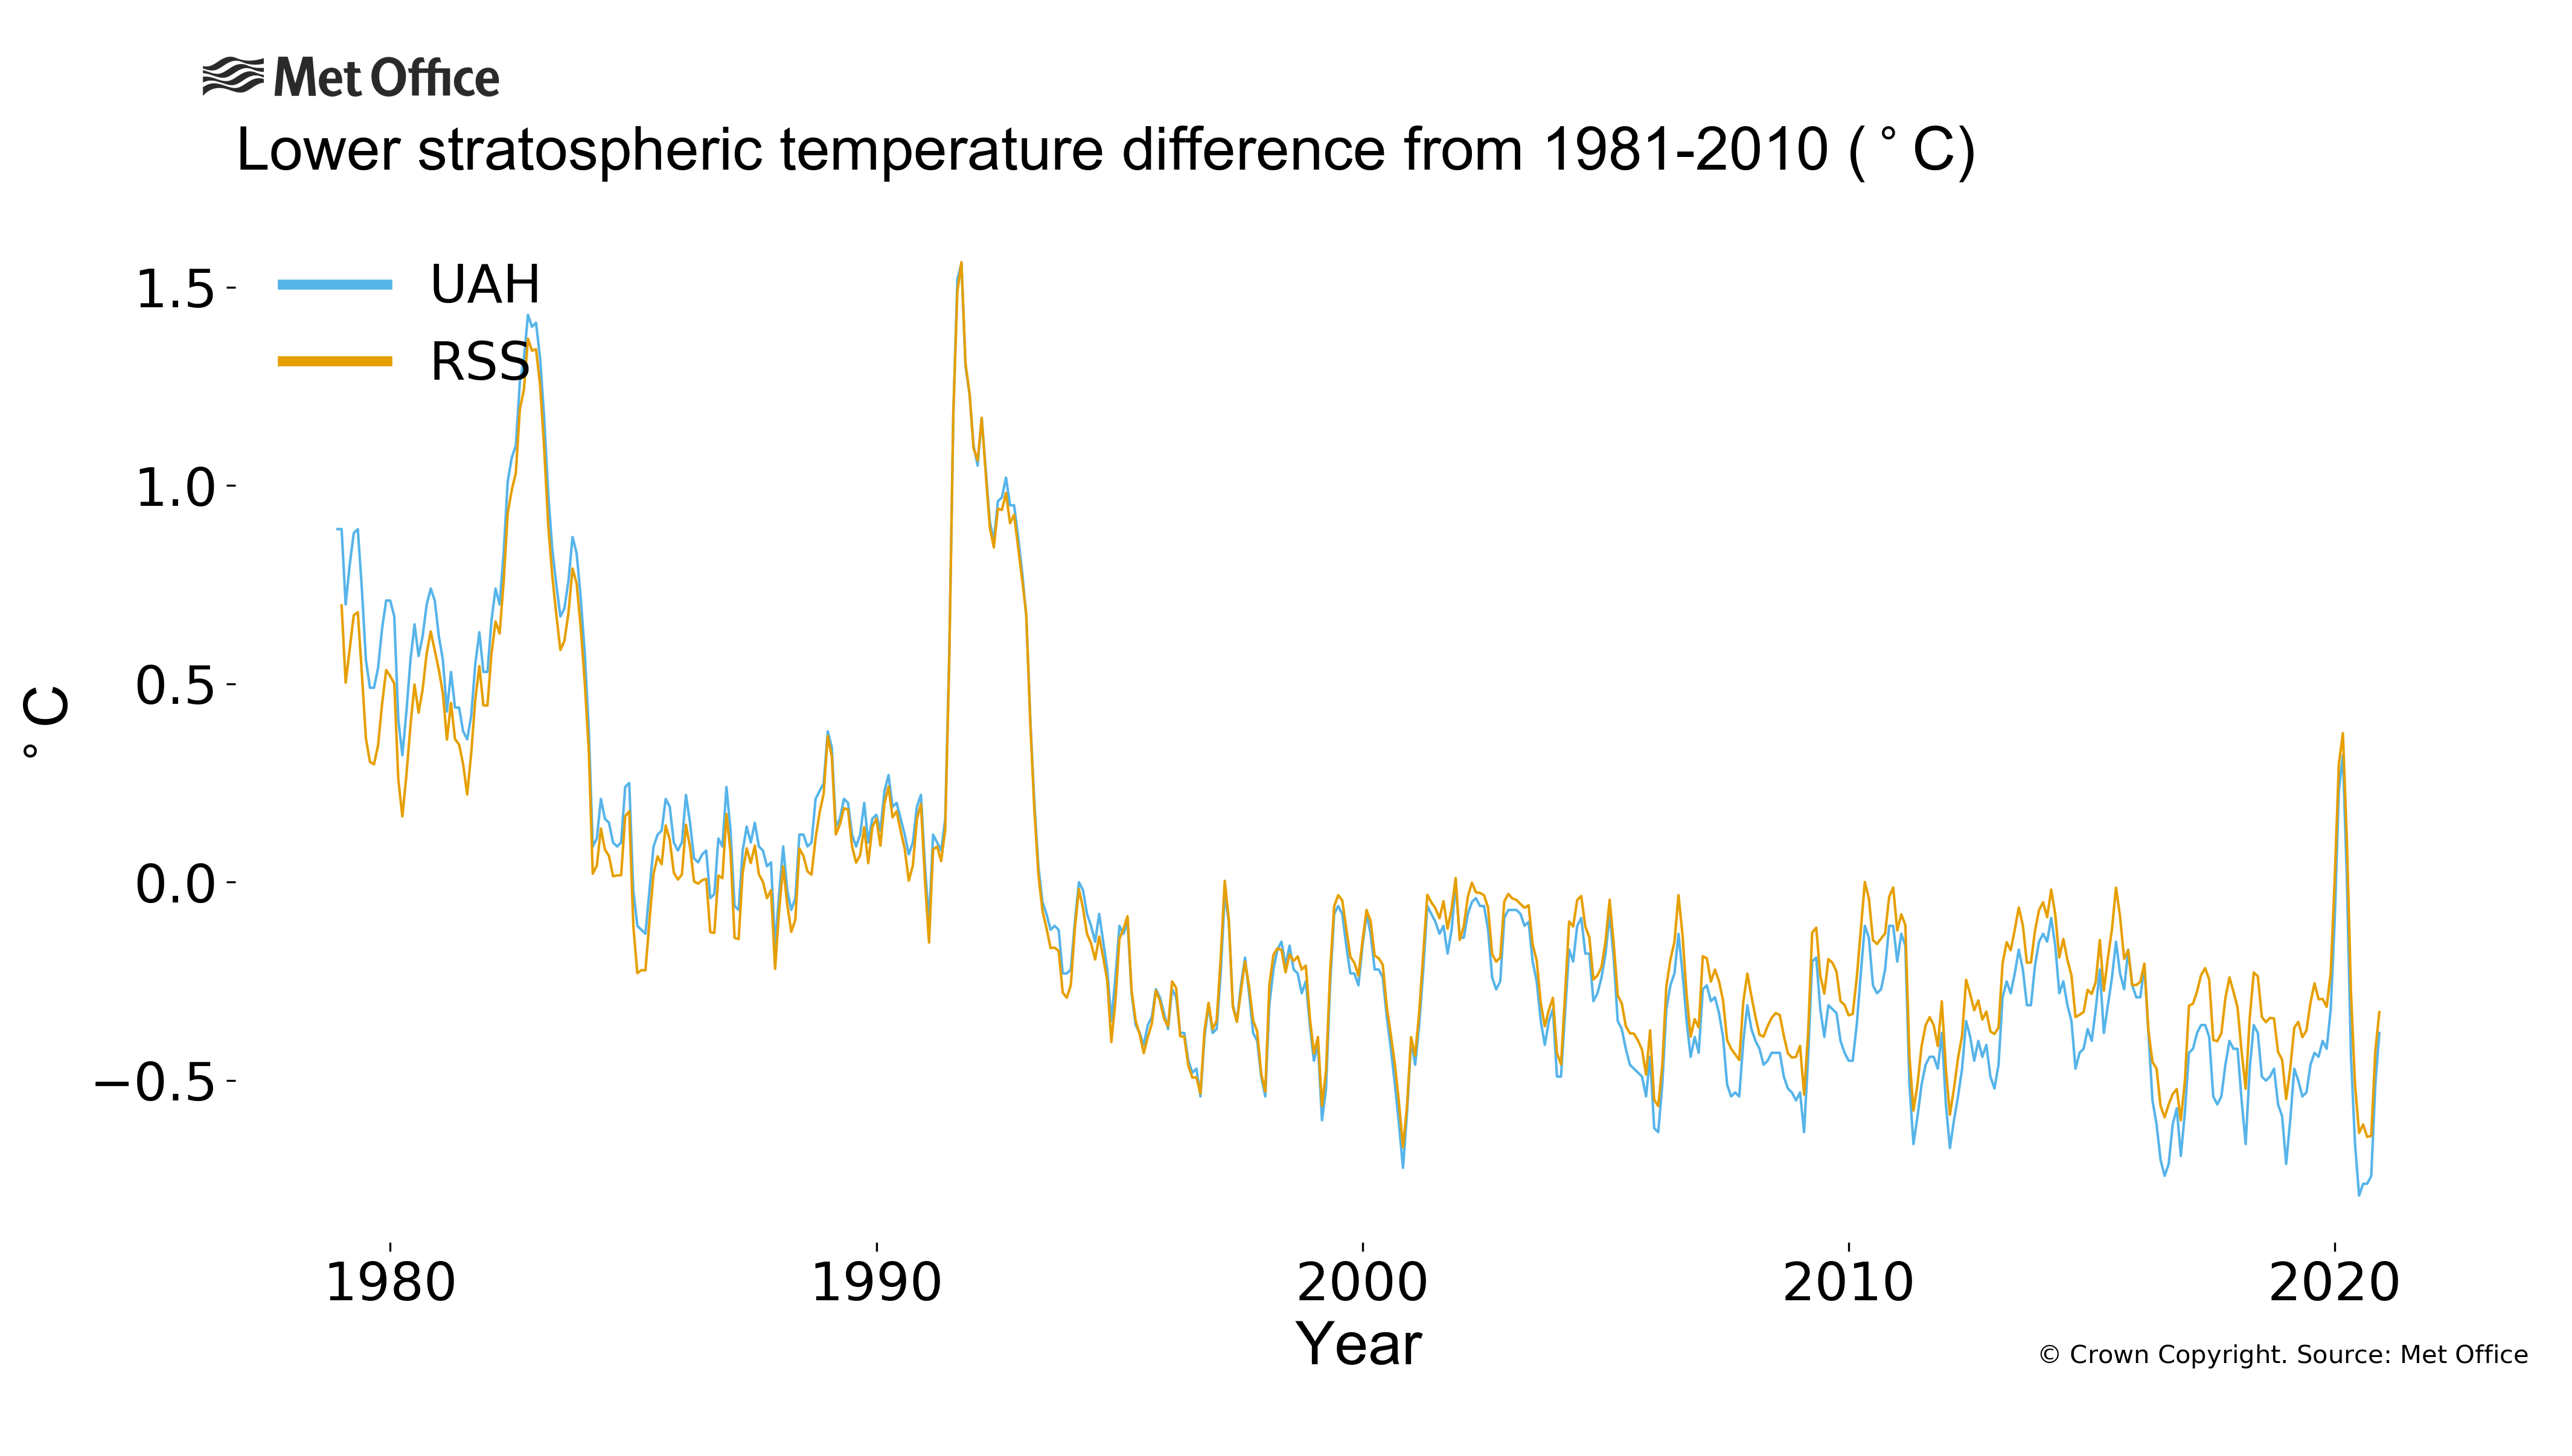 
Monthly quasi-global tropospheric temperature difference from the average for 1981-2010
